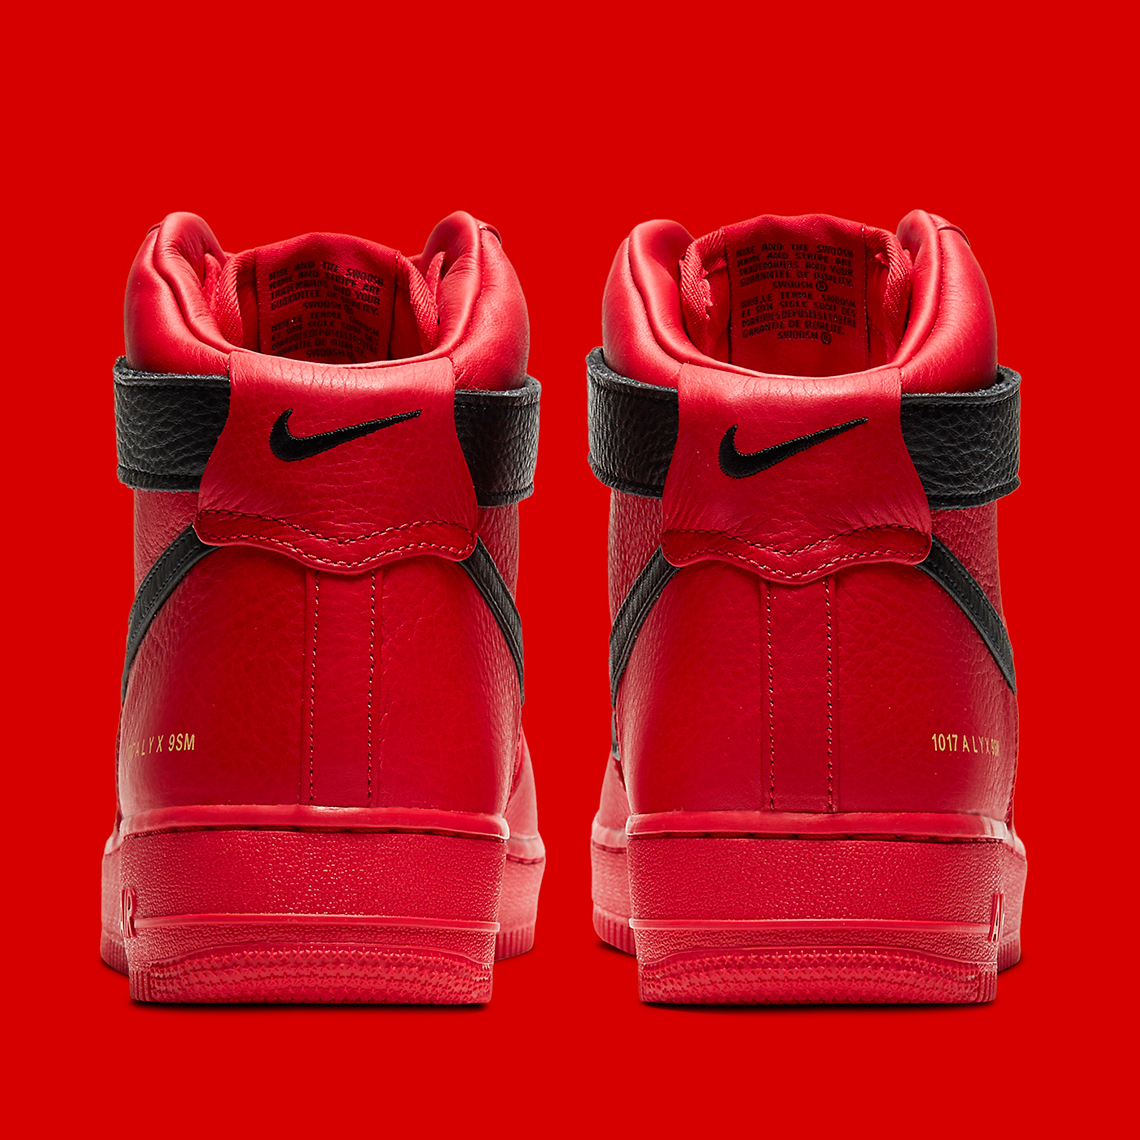 Alyx's Nike Air Force 1 High Is Dropping in Black and Red